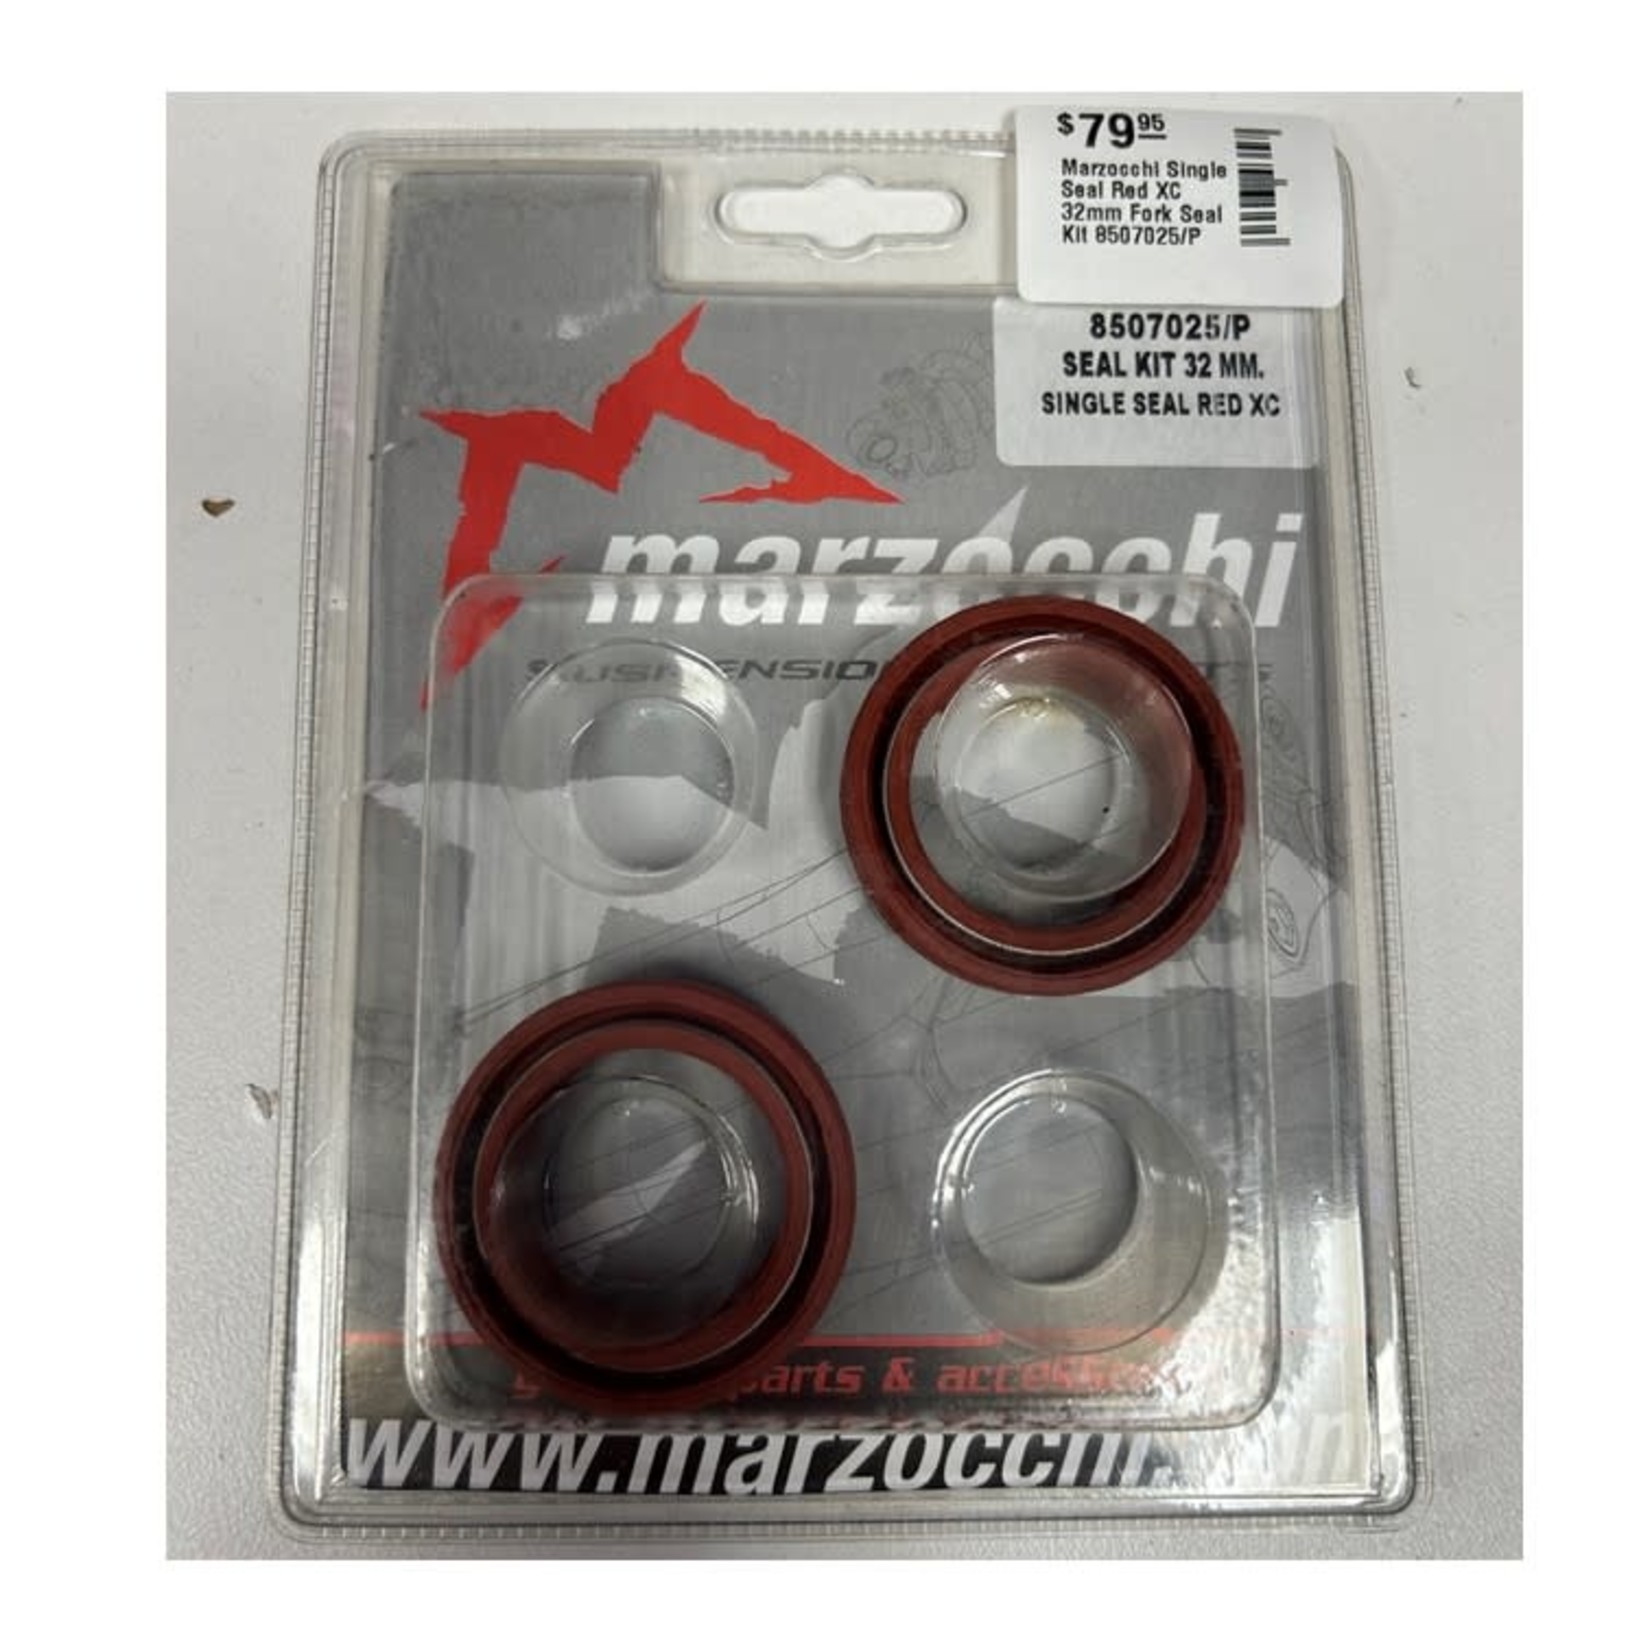 Marzocchi Single Seal Red XC 32mm Fork Seal Kit 8507025/P